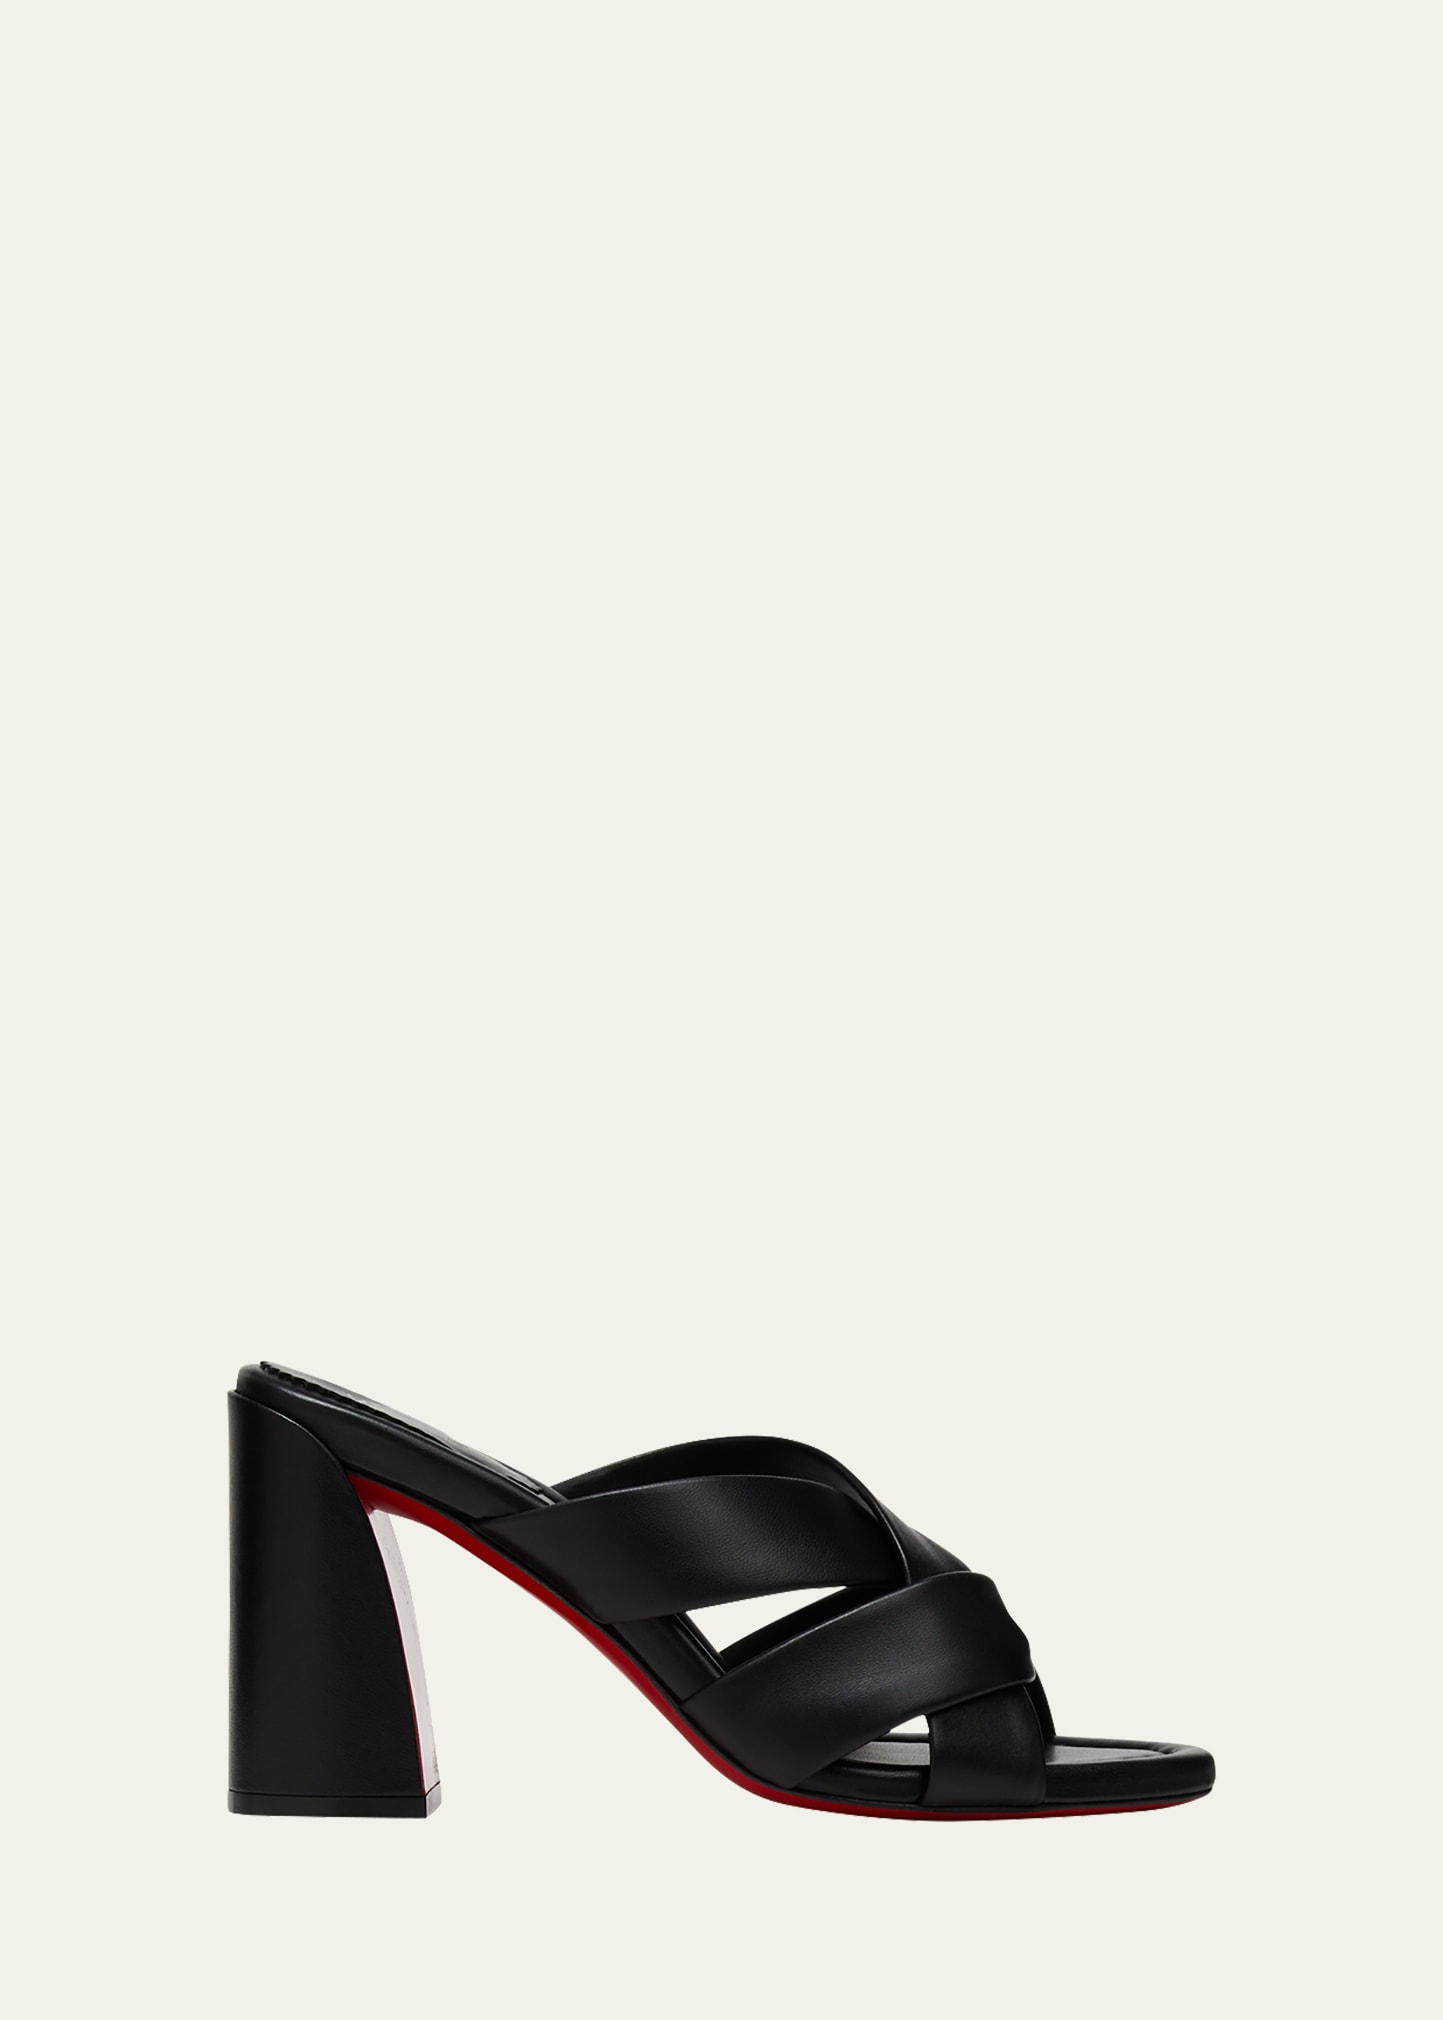 CHRISTIAN LOUBOUTIN Konstantimule Embellished Slippers - Red